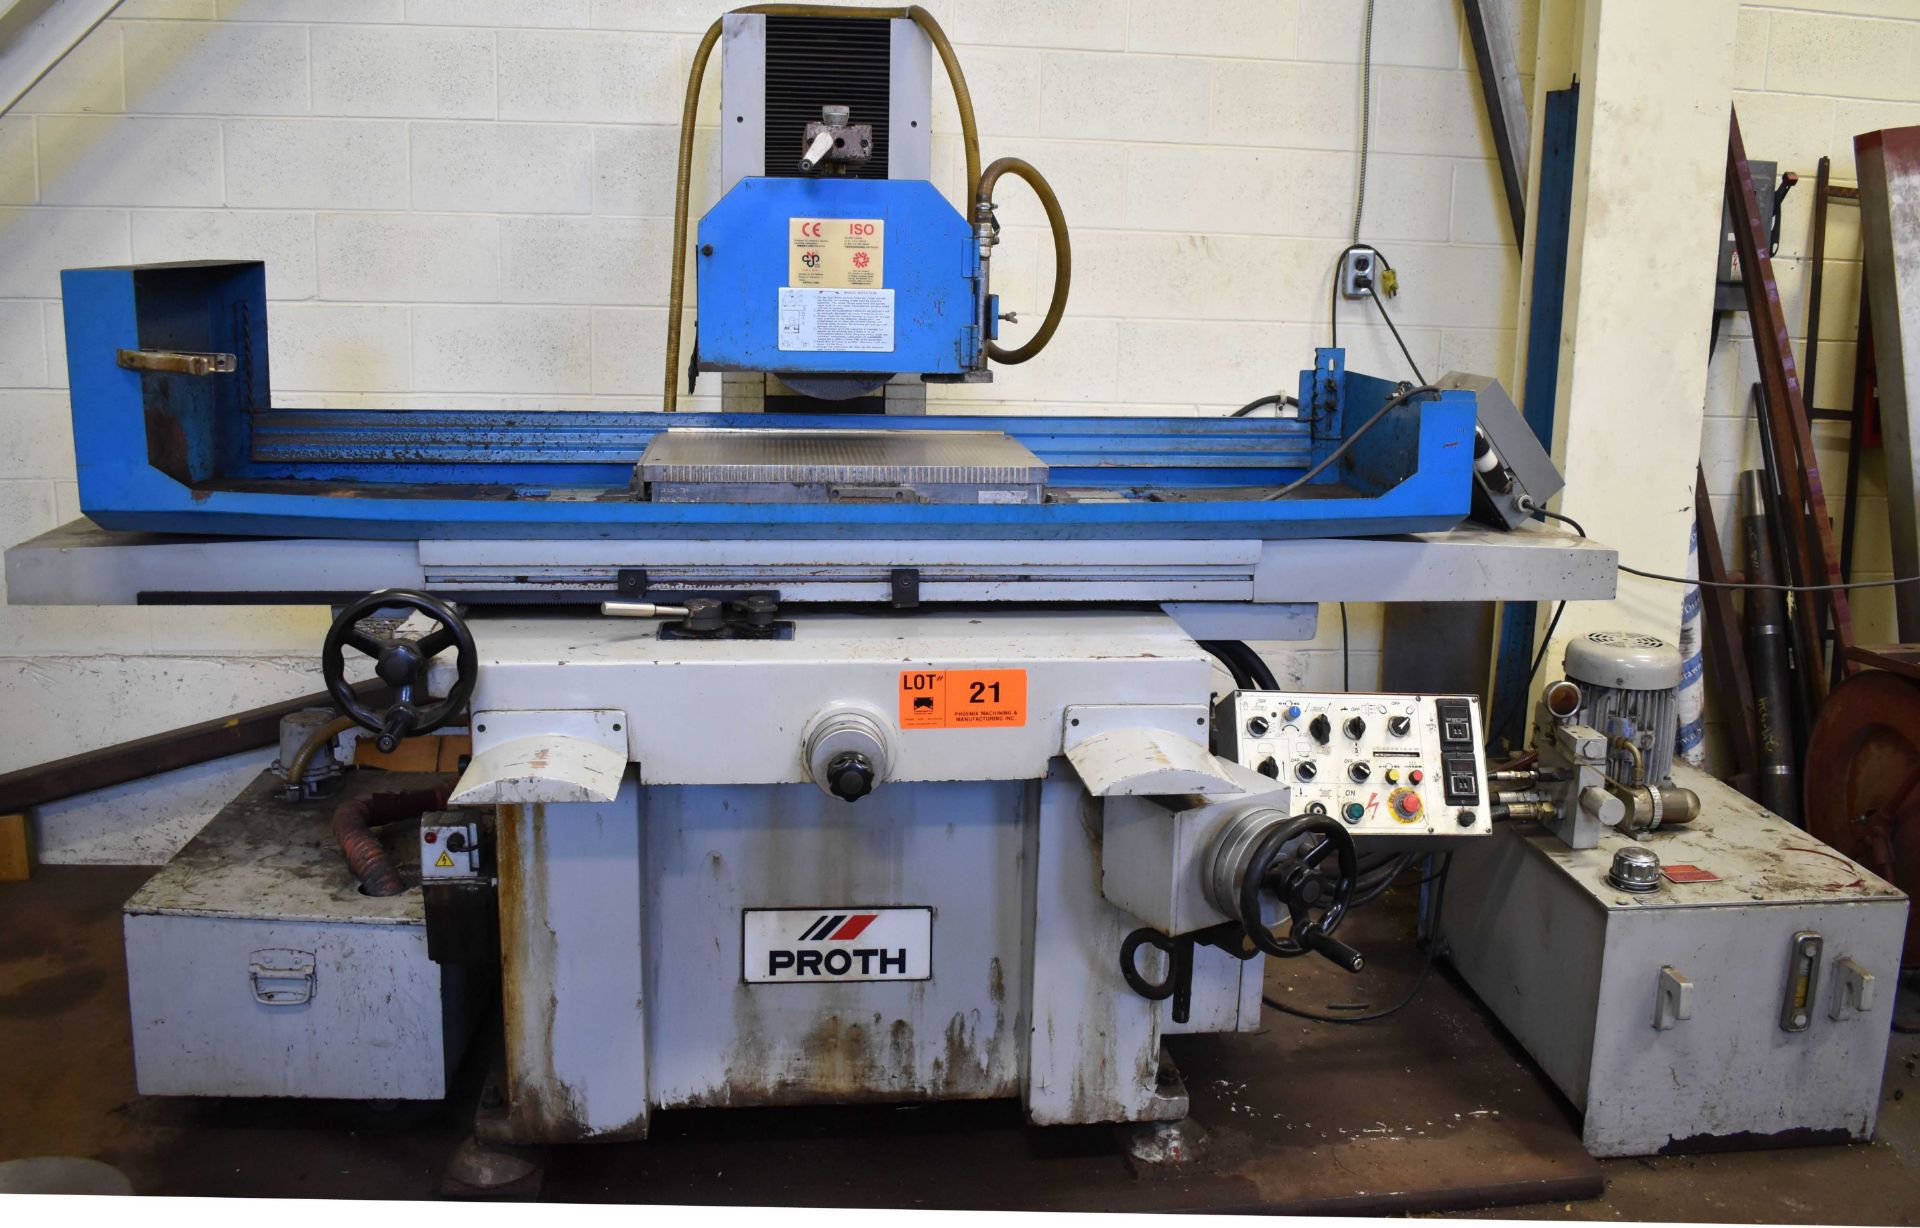 PROTH PSGS-4080AH HYDRAULIC SURFACE GRINDER WITH 24"X16" ELECTROMAGNETIC CHUCK, INCREMENTAL DOWN